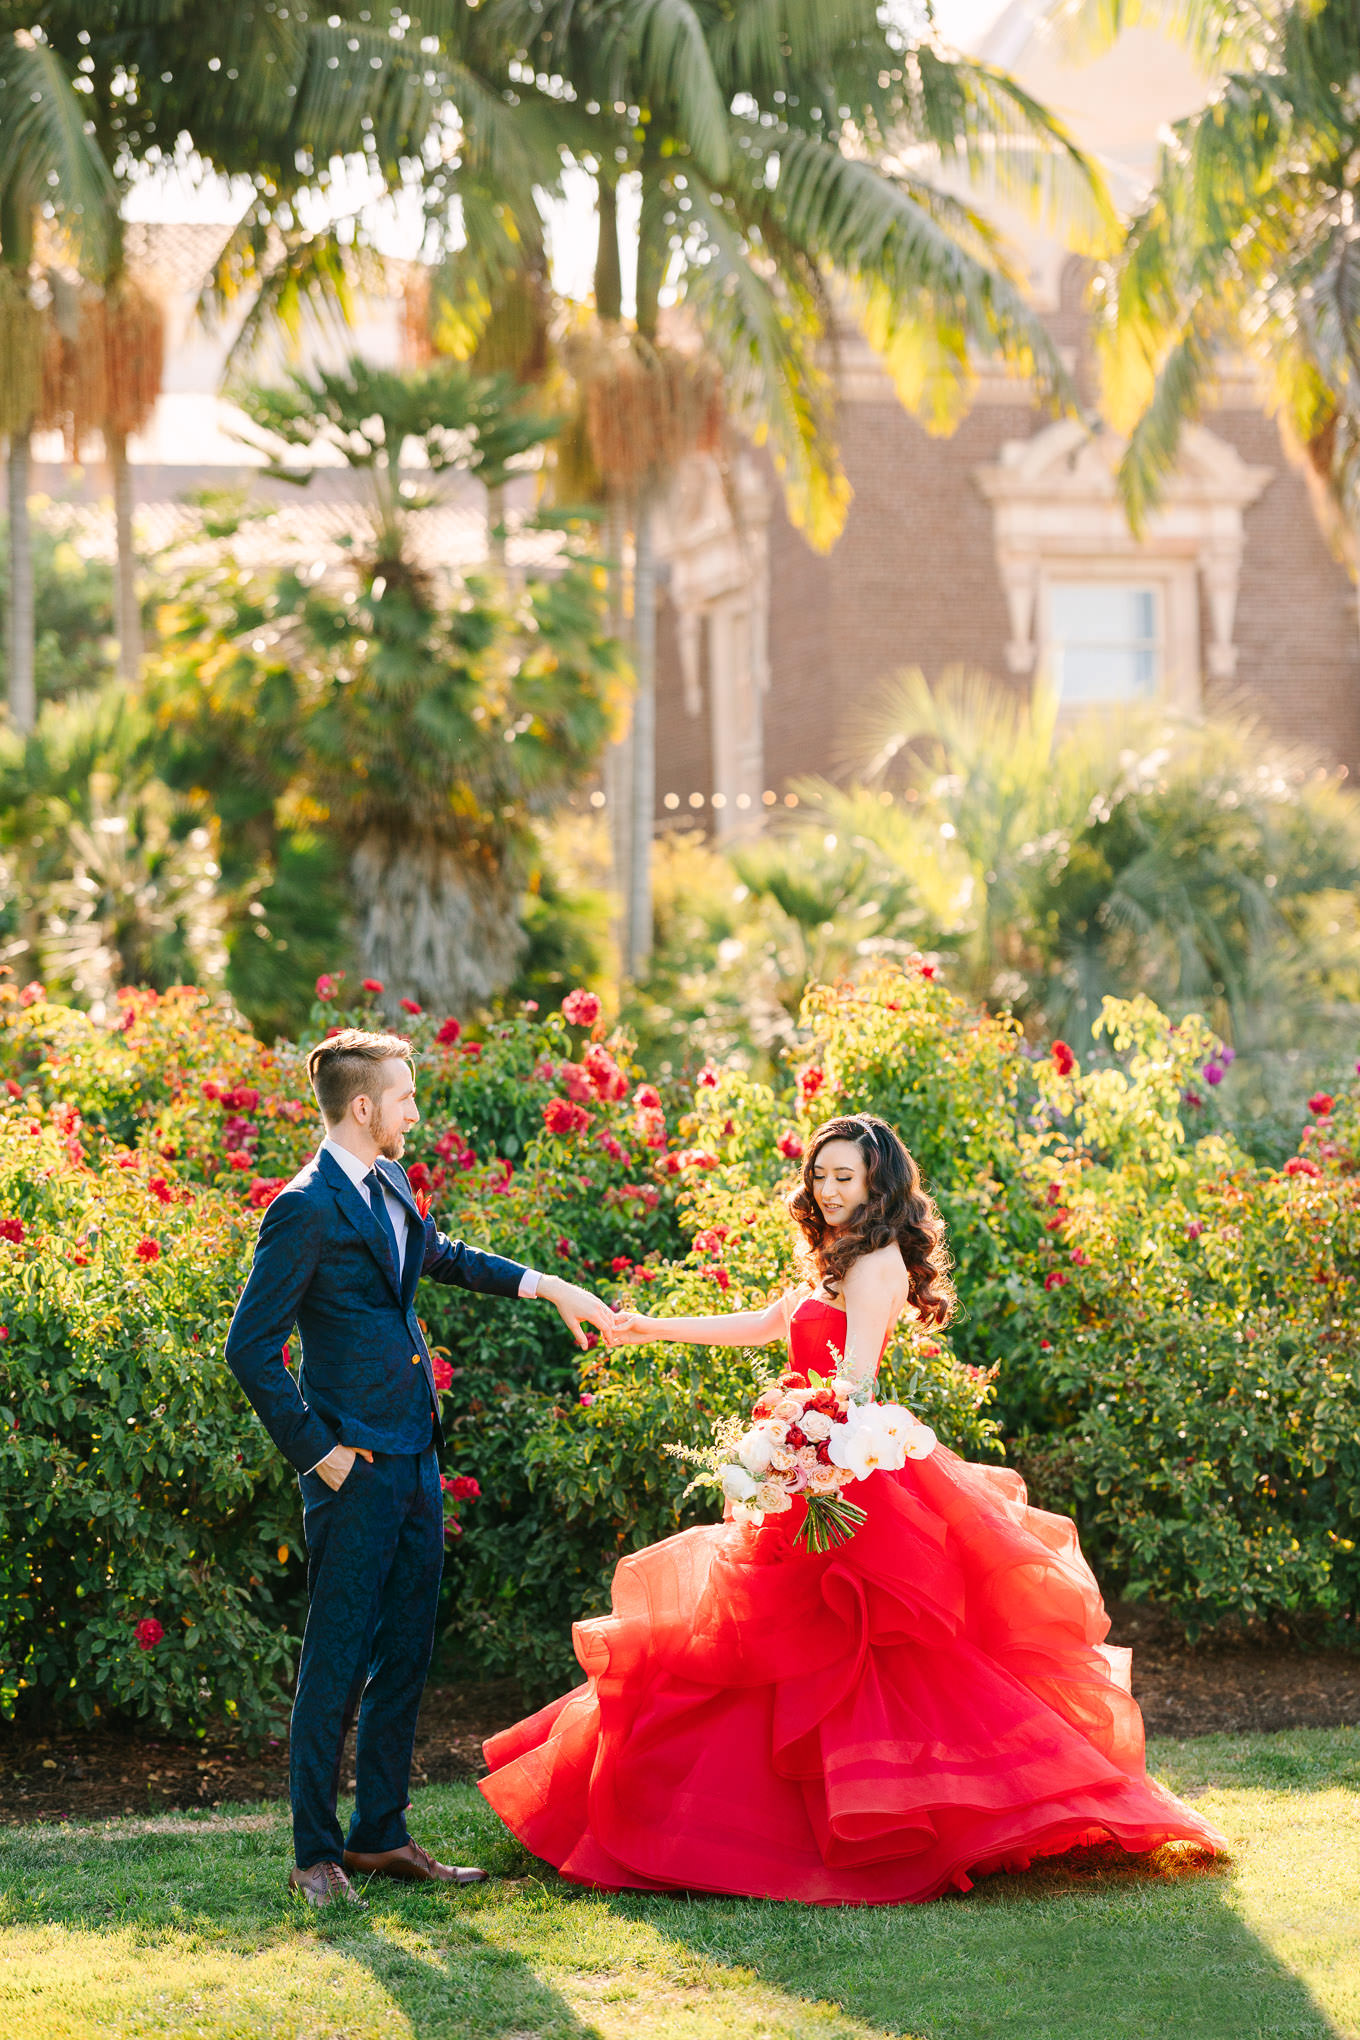 Natural History Museum Wedding with bride in red gown | Wedding and elopement photography roundup | Los Angeles and Palm Springs photographer | #losangeleswedding #palmspringswedding #elopementphotographer Source: Mary Costa Photography | Los Angeles